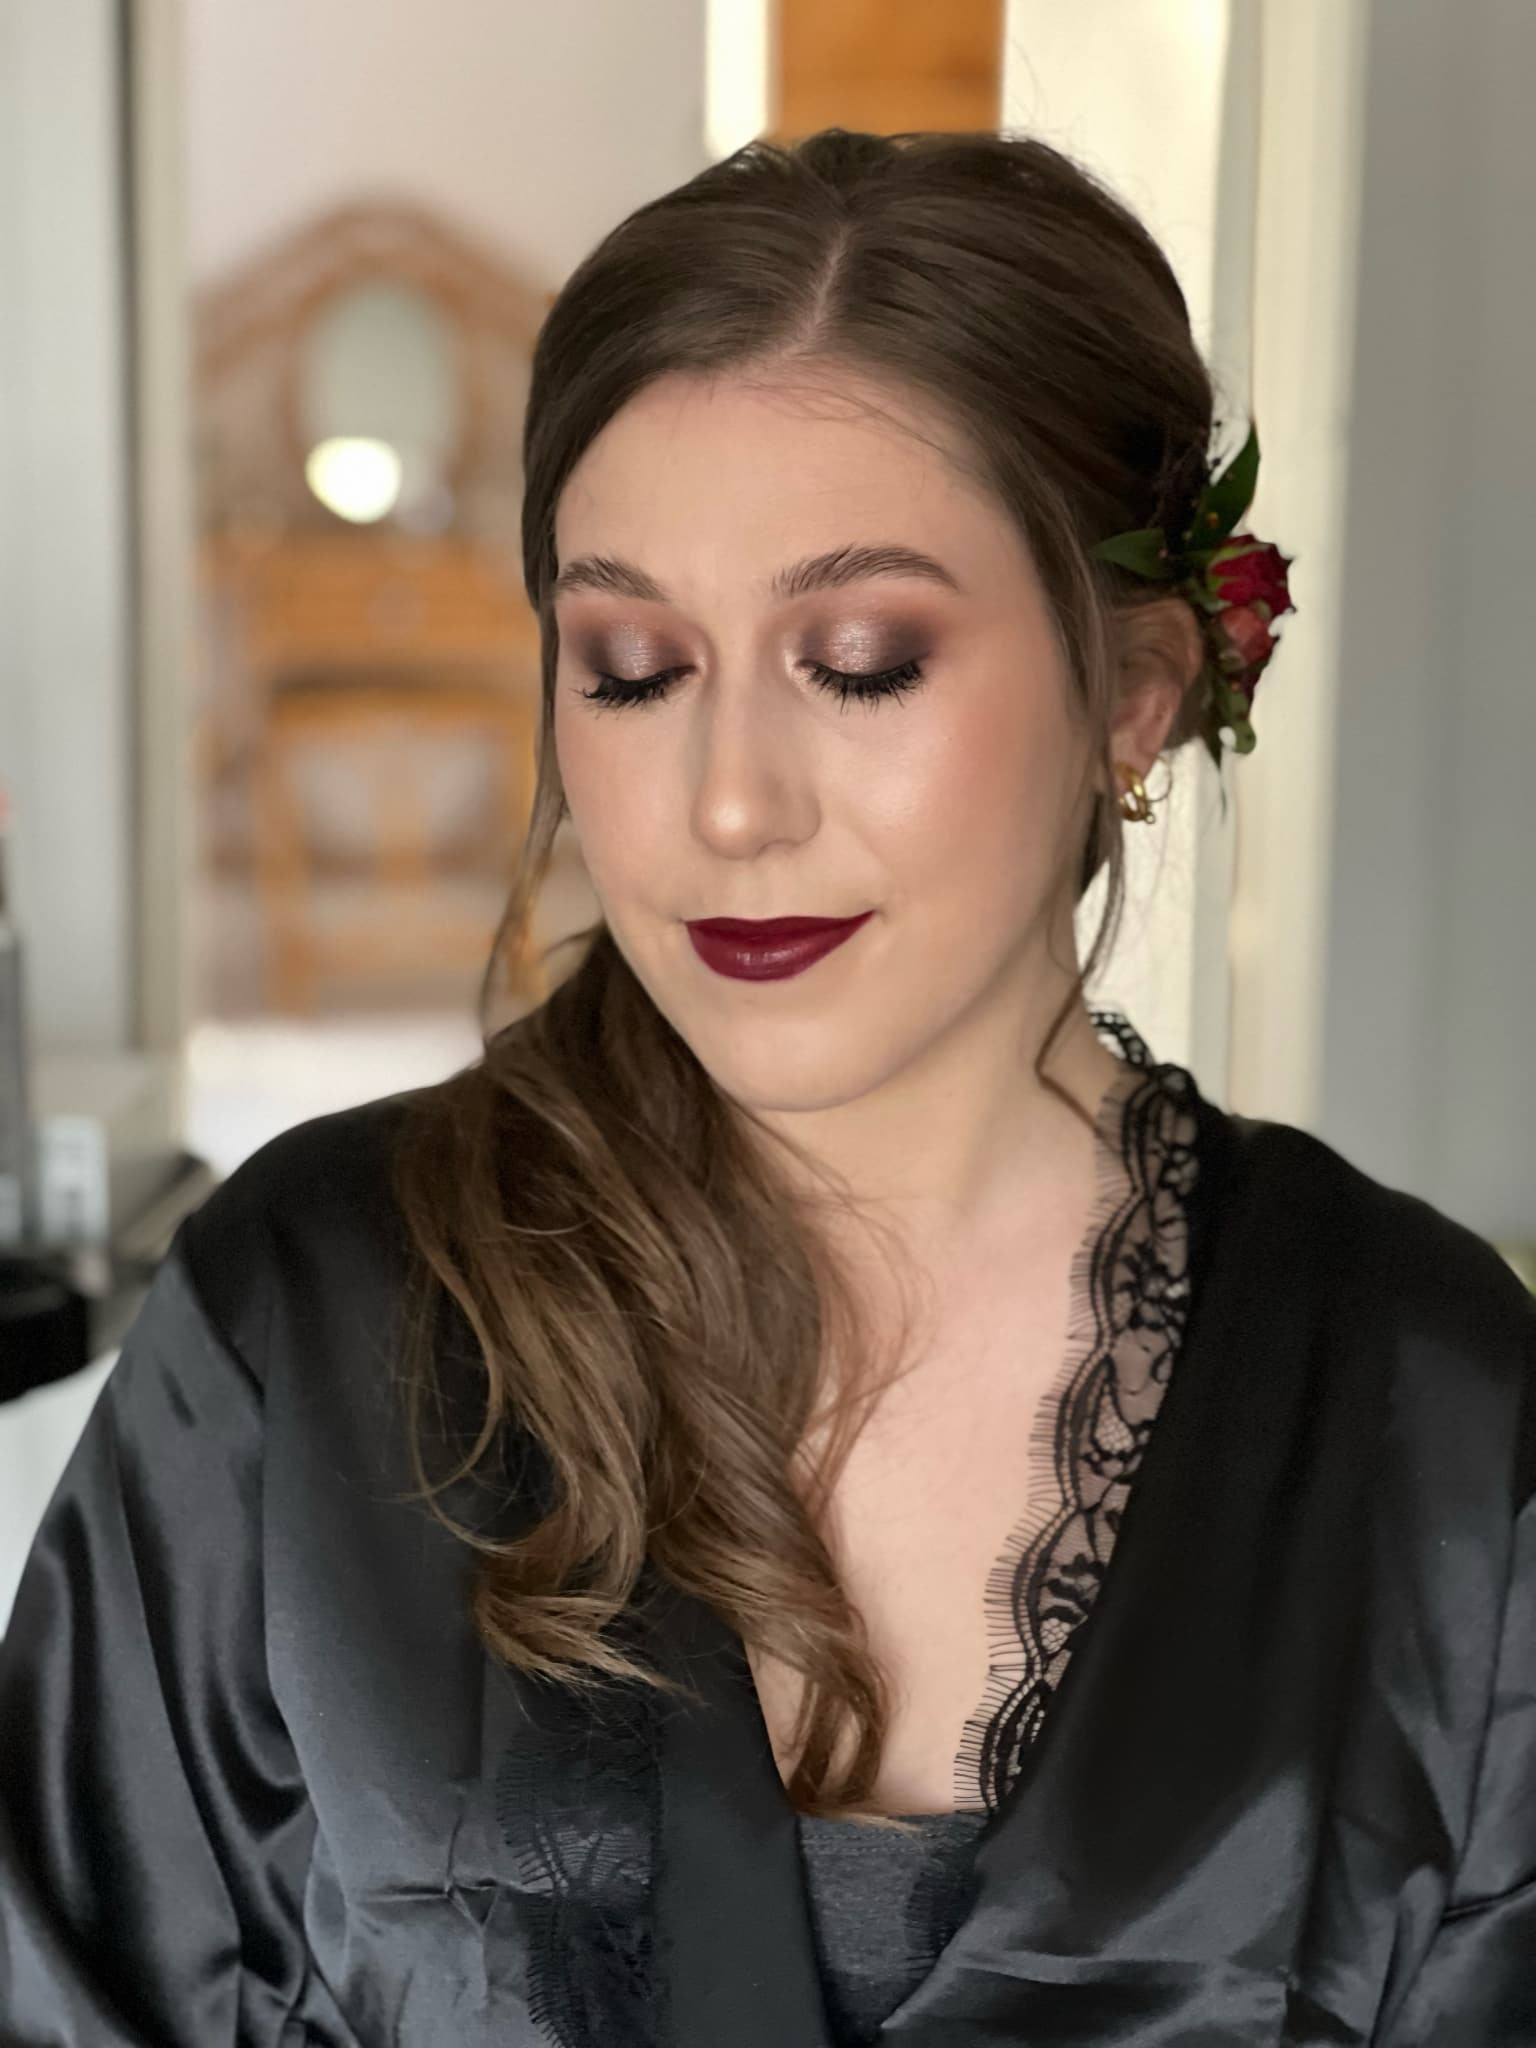 Full Bridal Glam with Neutral Cool Halo Eye